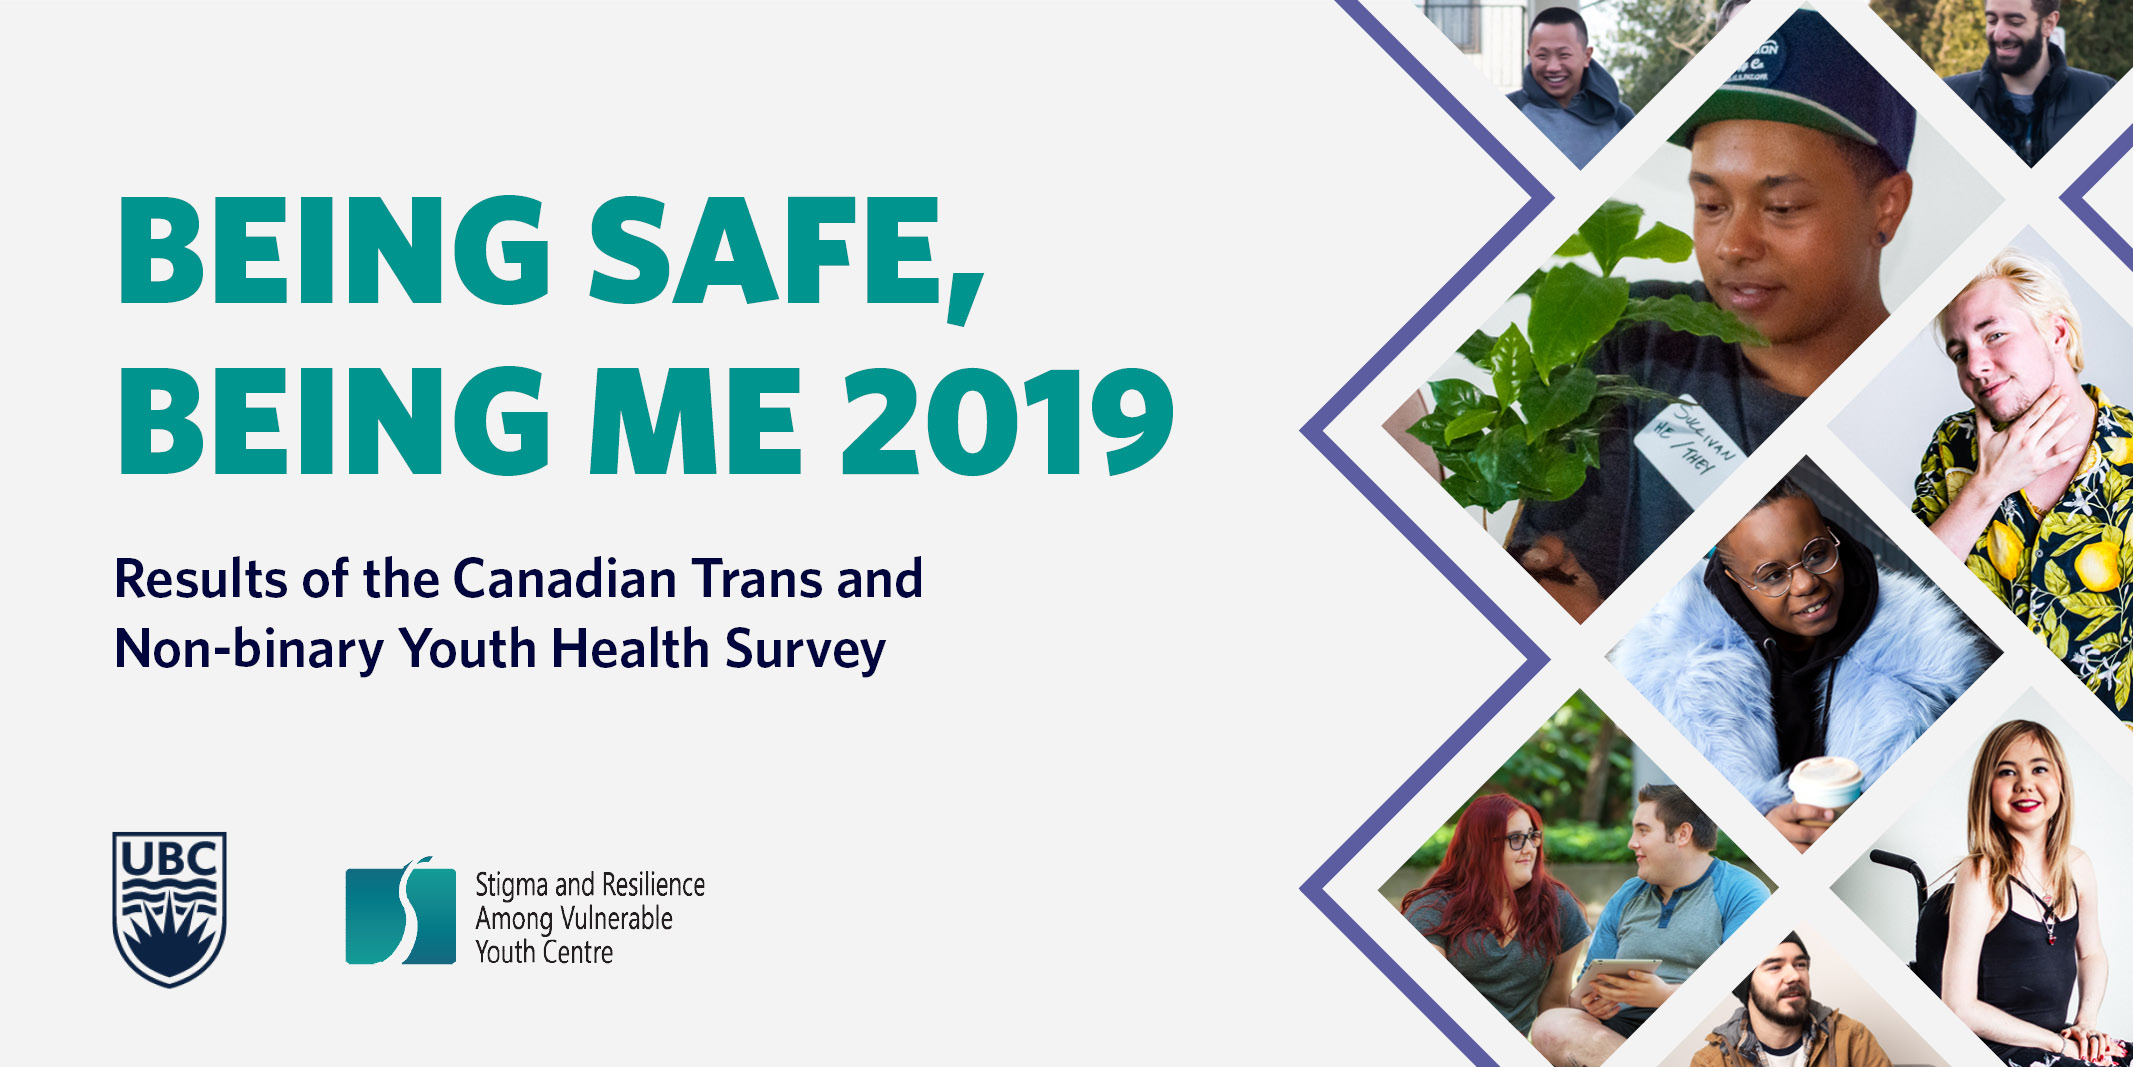 On the left is text that reads, "Being safe, being me 2019: Results of the Canadian Trans and Non-binary Youth Health Survey." Below the text is a UBC logo and SARAVYC logo. To the right are 8 different images of youth.